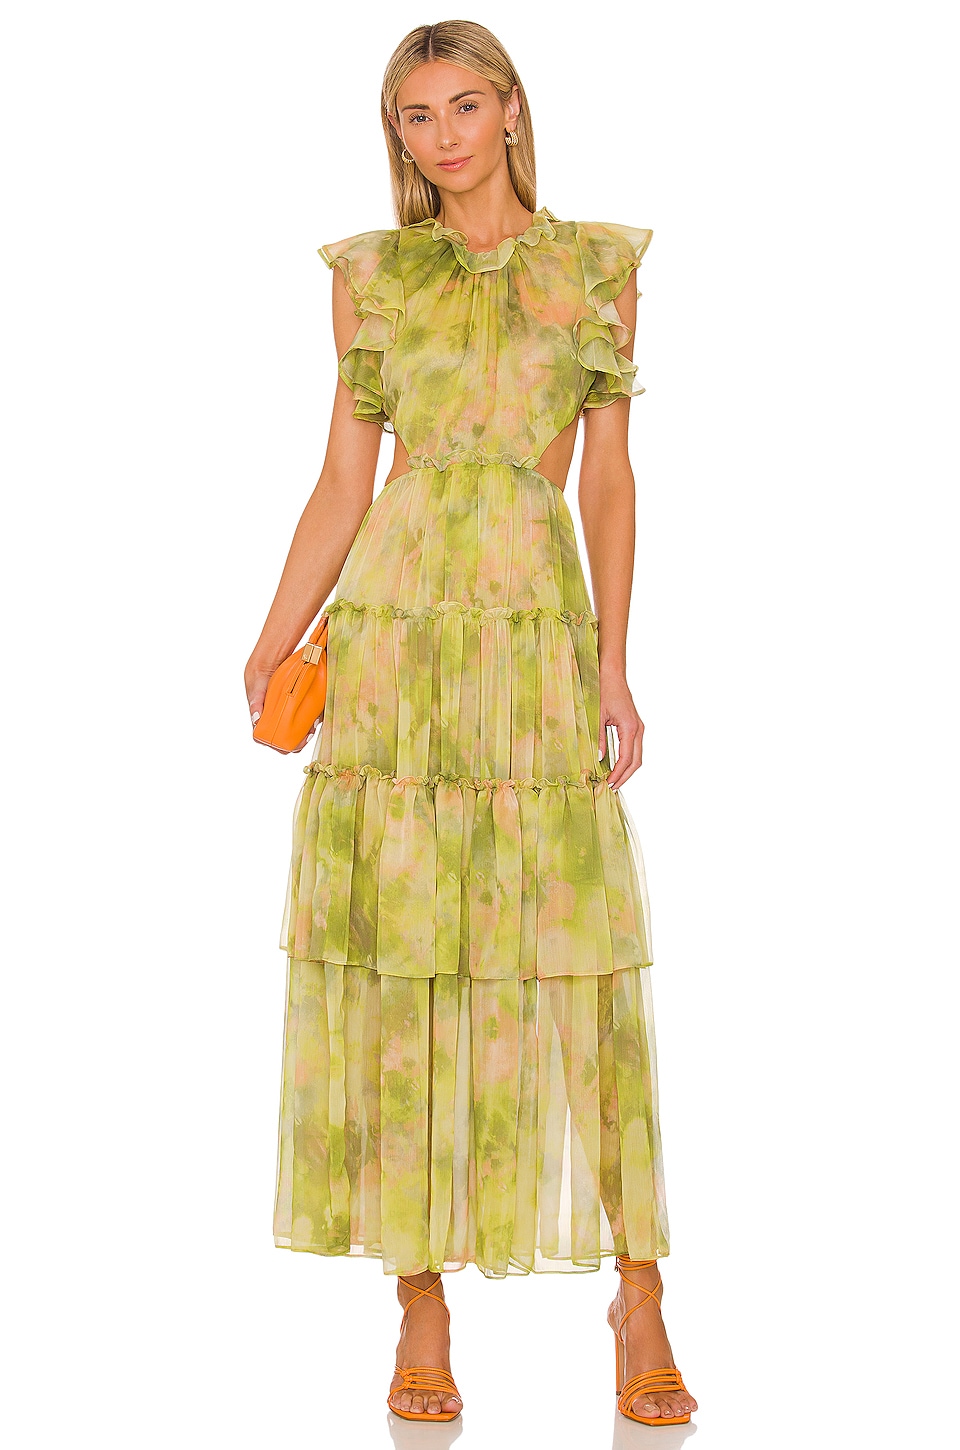 Floral green maxi dress from a brand like Free People - Lisa Los Angeles